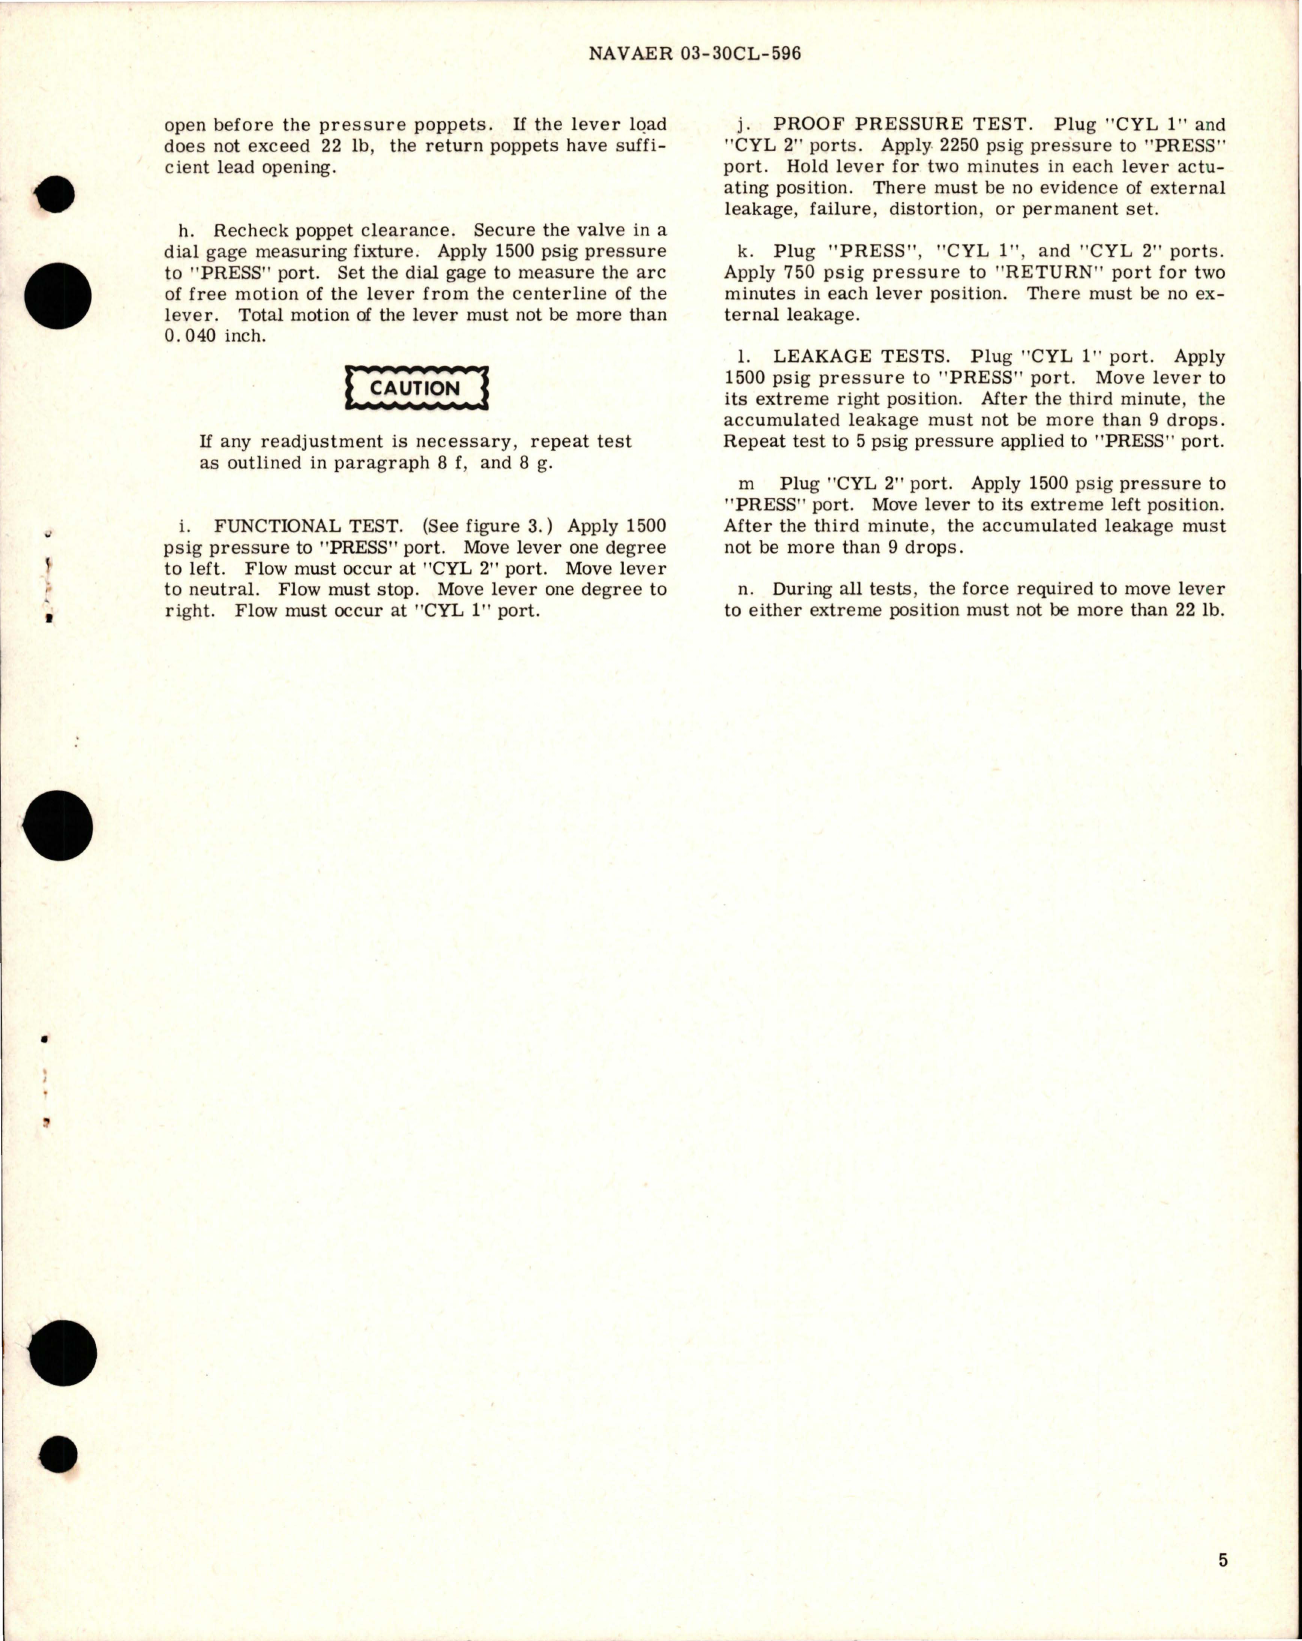 Sample page 5 from AirCorps Library document: Overhaul Instructions with Parts for 4-Way Walking Beam Hydraulic Valve - Part 50389 